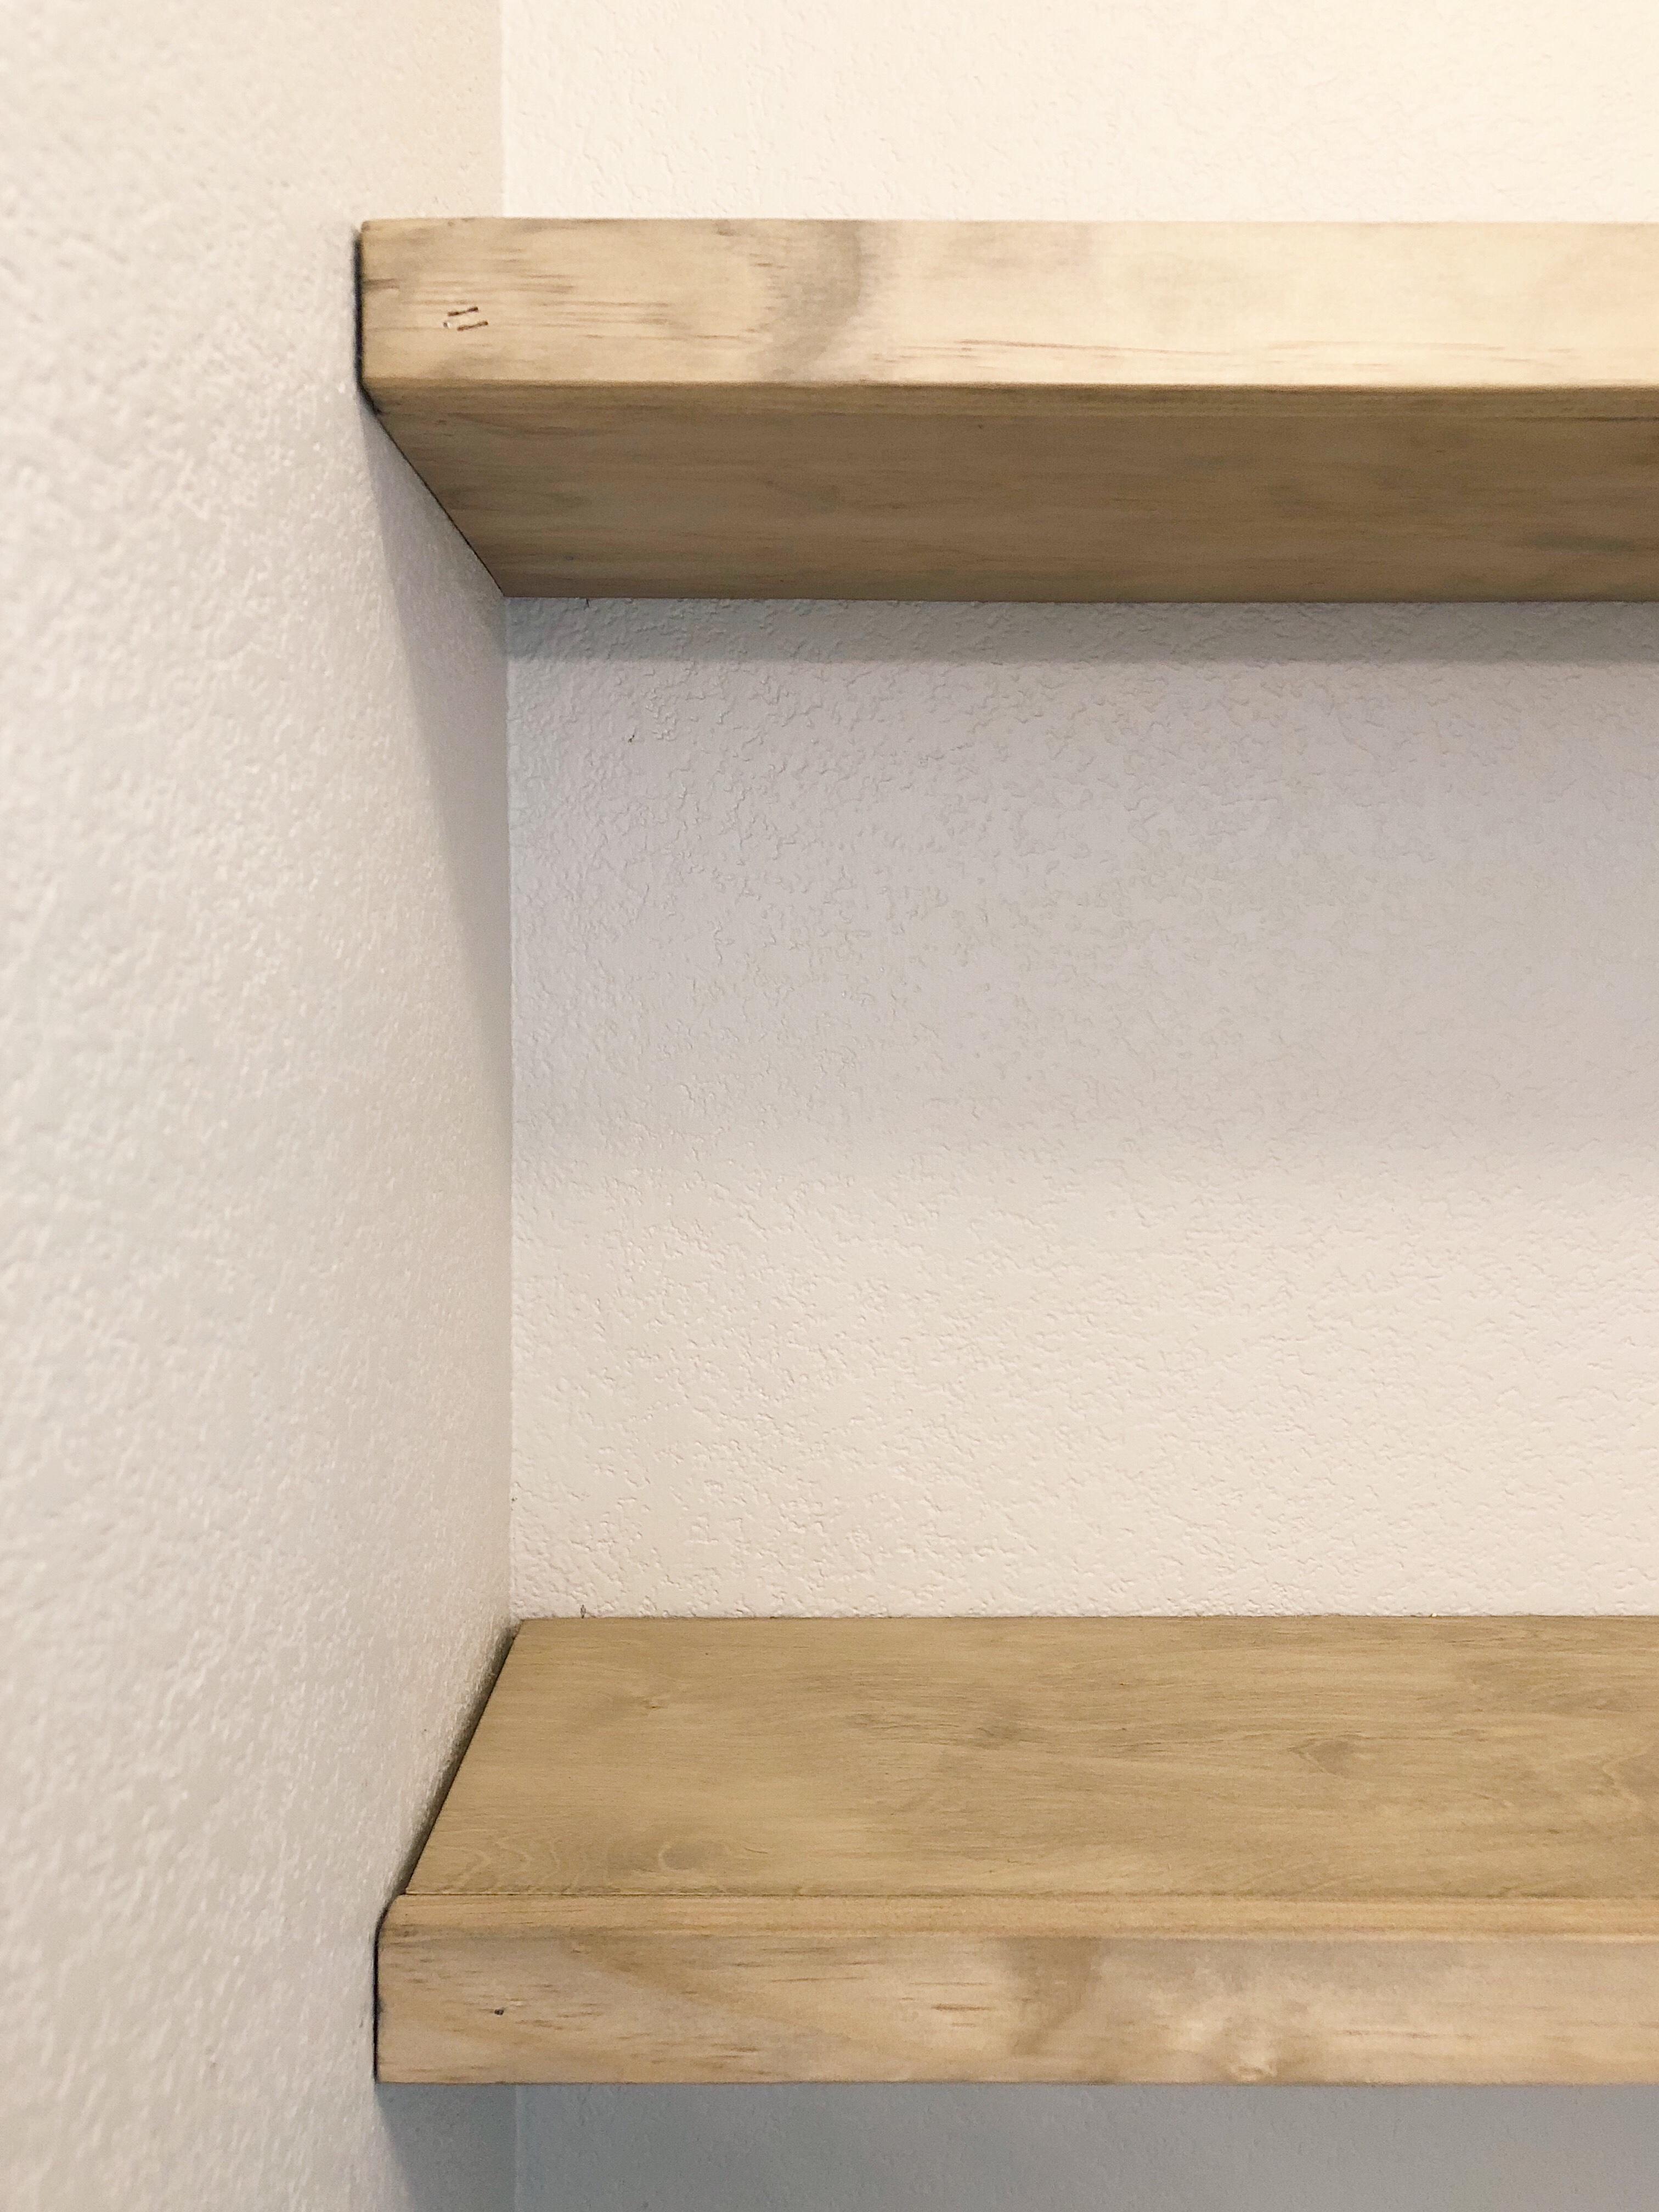 Easily Build A Floating Shelf Angela, Ply Thickness For Shelves